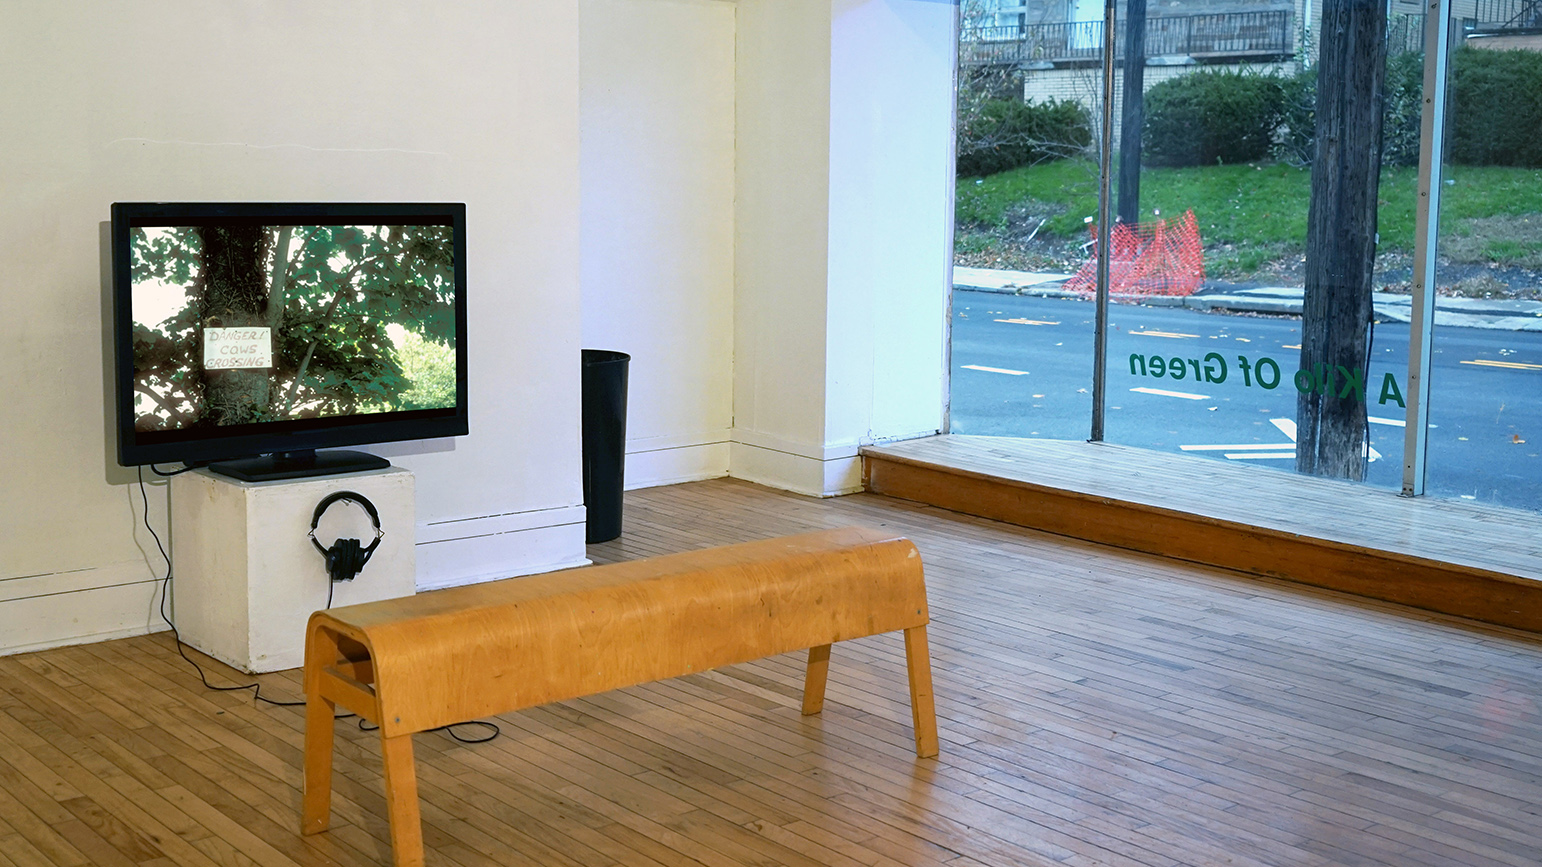 Installation image of The Frame showing a video with bench in front